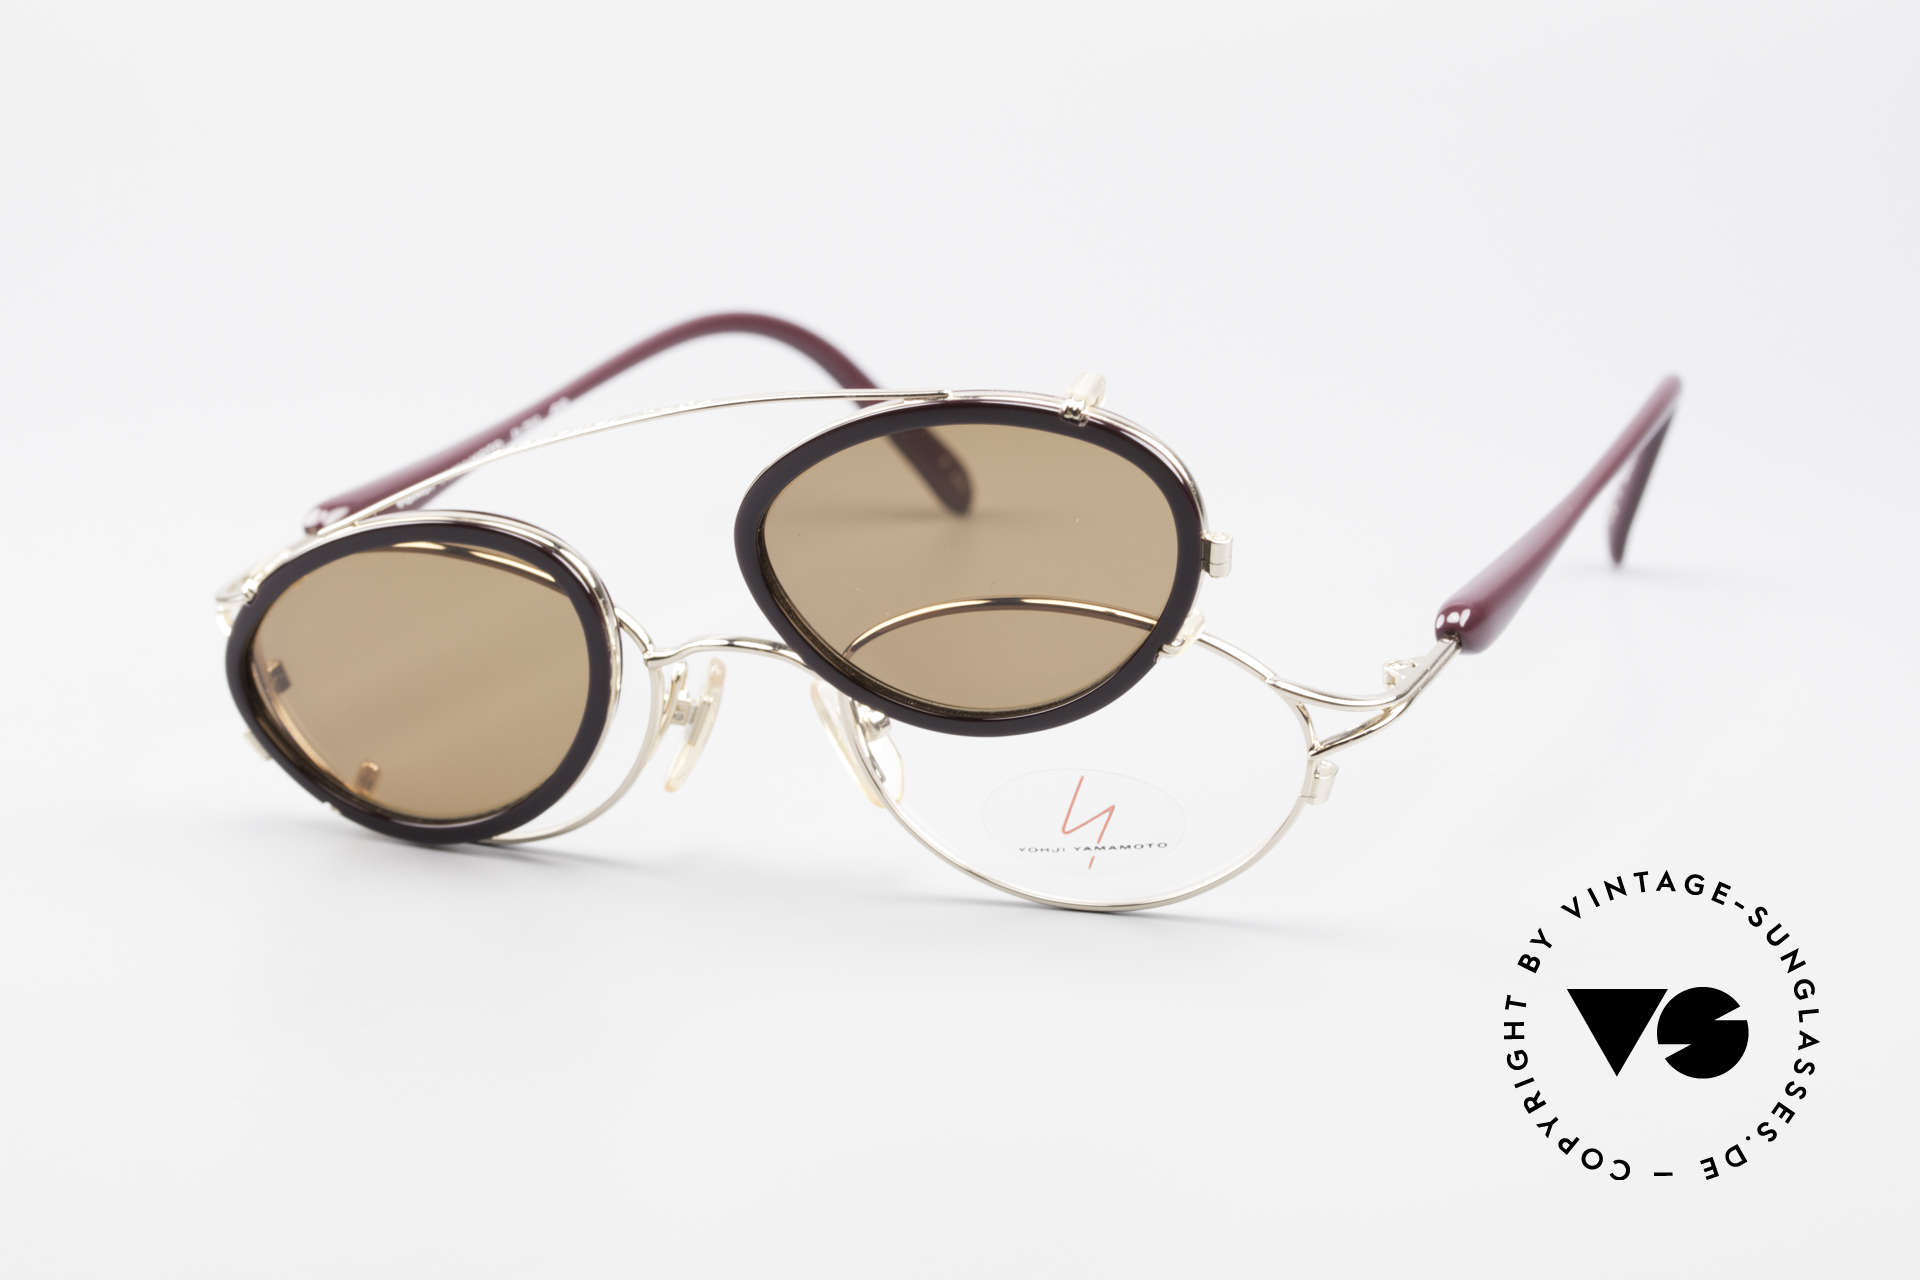 Yohji Yamamoto 51-7210 Clip-On 90's No Retro Frame, frame can be glazed with optical lenses of any kind, Made for Men and Women